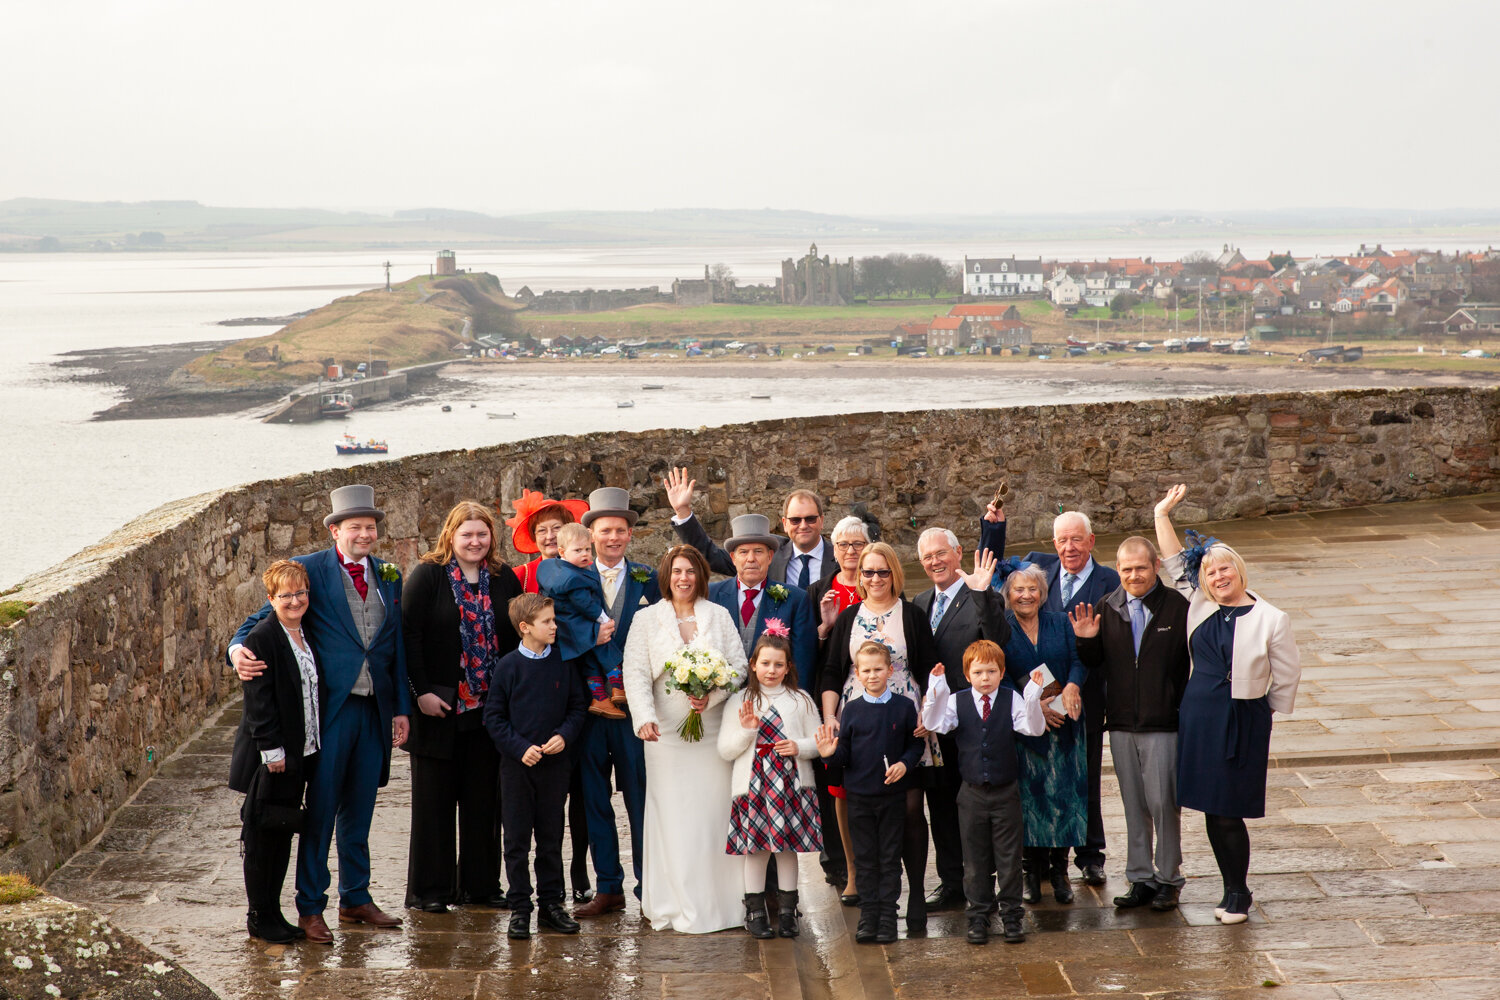 PICTORIAL_wedding-lindisfarne-castle-northumberland-photographer-mead-locally-sourced-holy-island-13.jpg